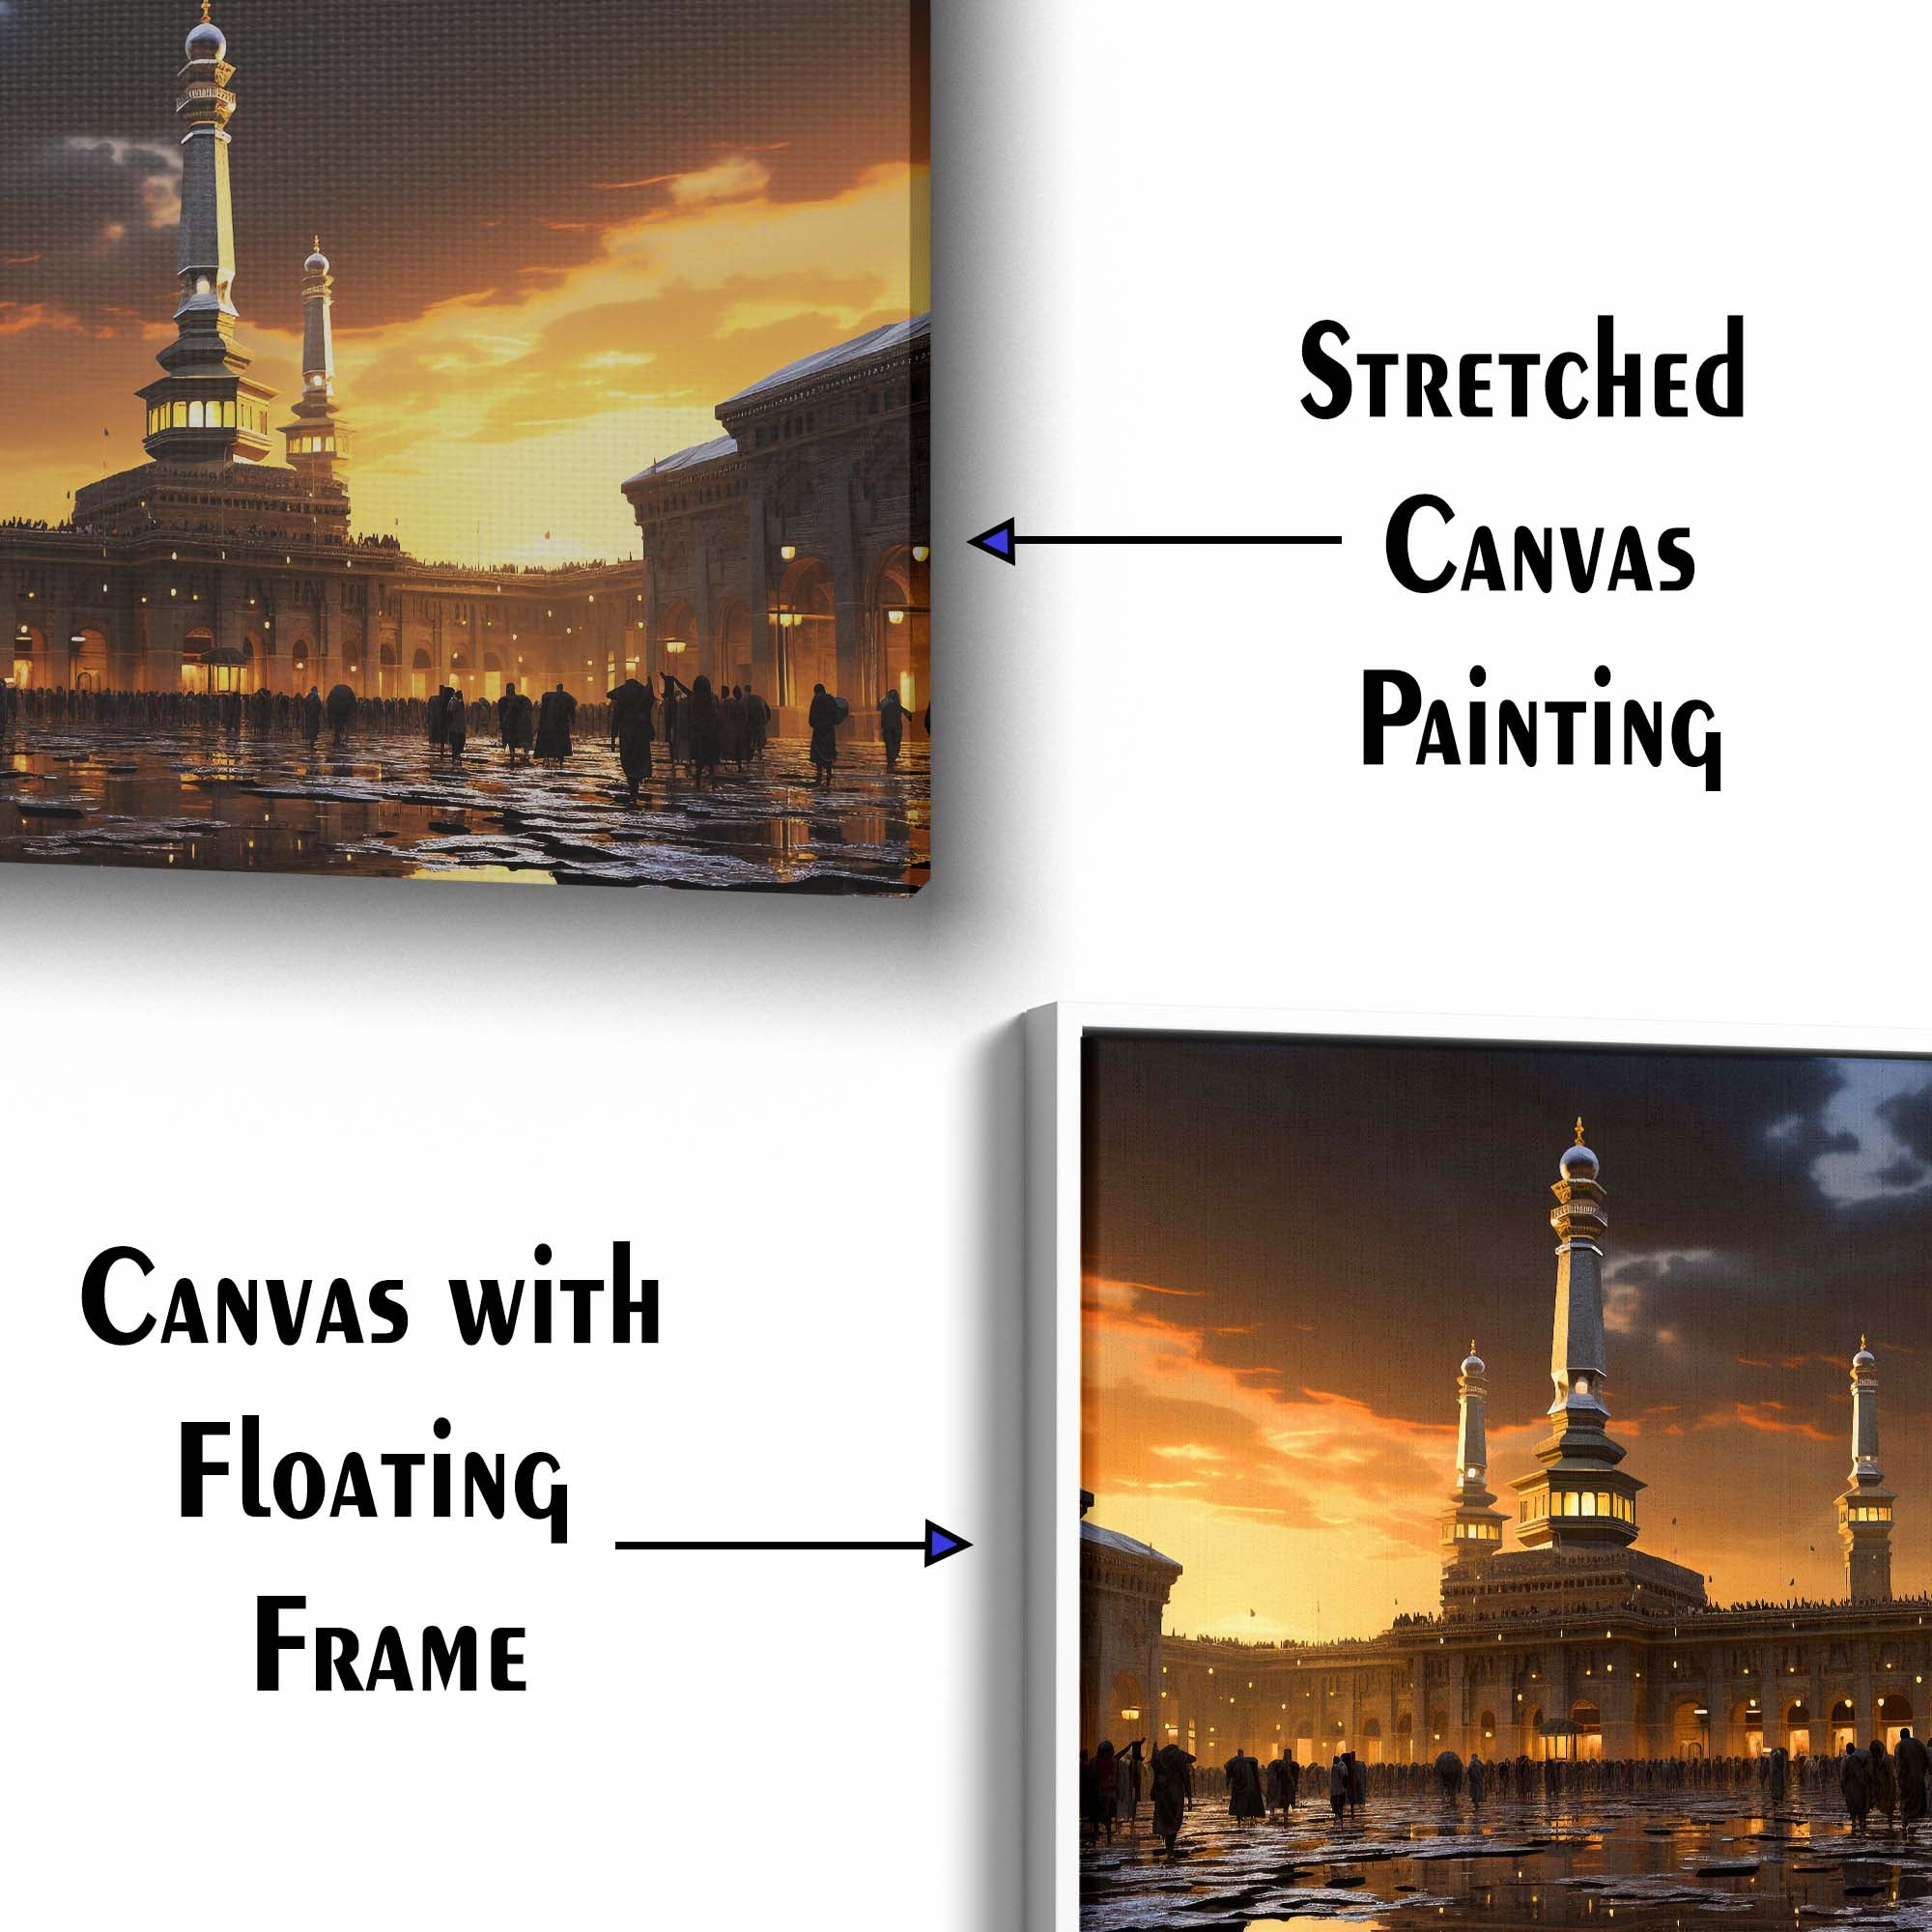 The Beautiful View Of The City Of Mecca Canvas Wall Painting